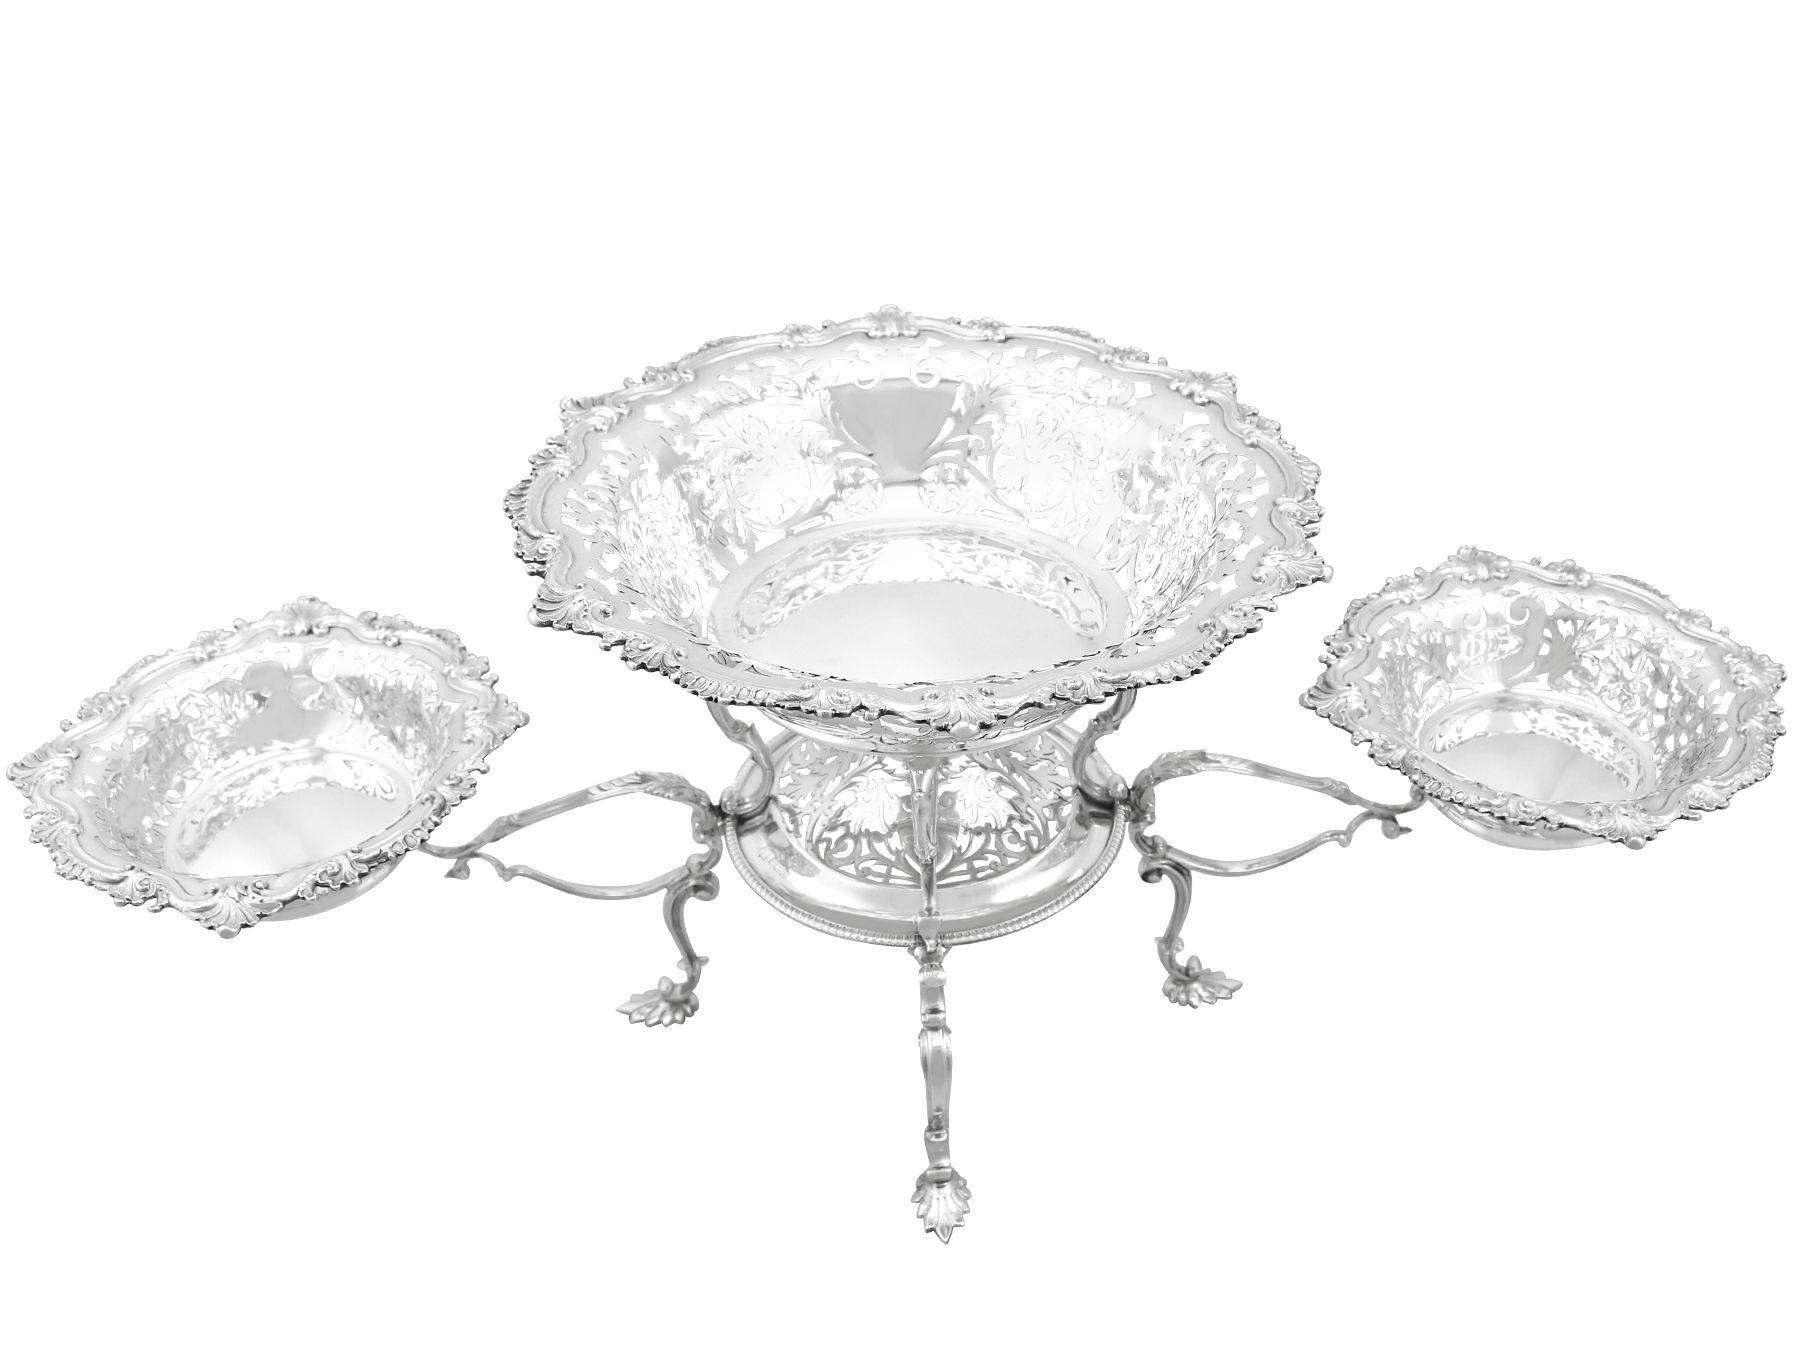 An exceptional, fine and impressive antique Edwardian English sterling silver centrepiece; an addition to our ornamental silverware collection.

This exceptional antique Edwardian sterling silver centrepiece has a circular rounded form onto four